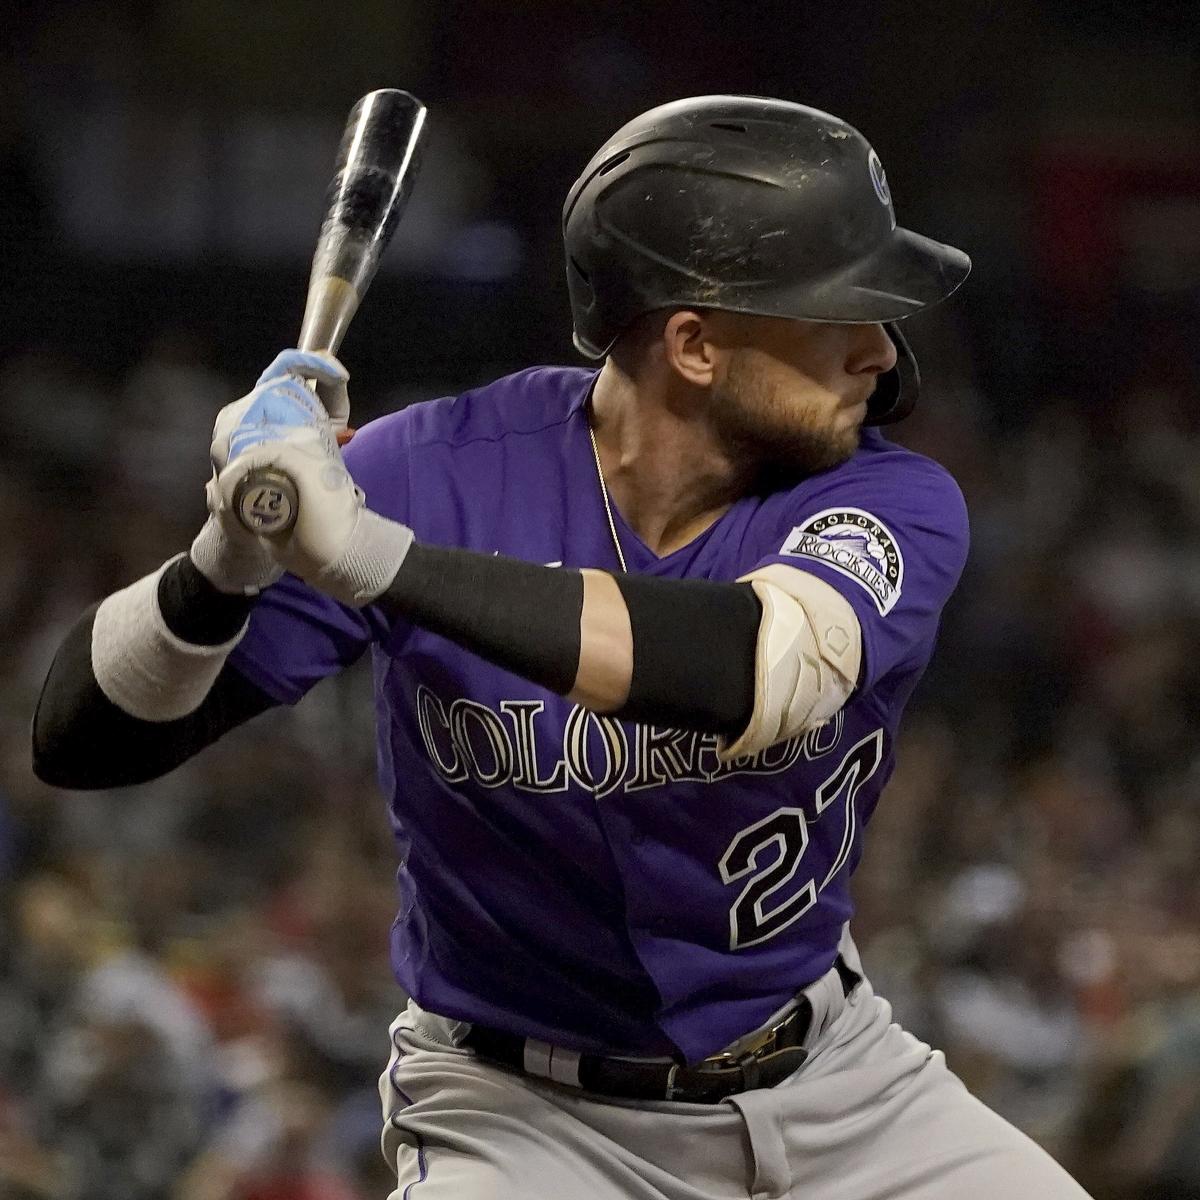 Rumor: The reason why Mariners failed to sign Trevor Story, revealed